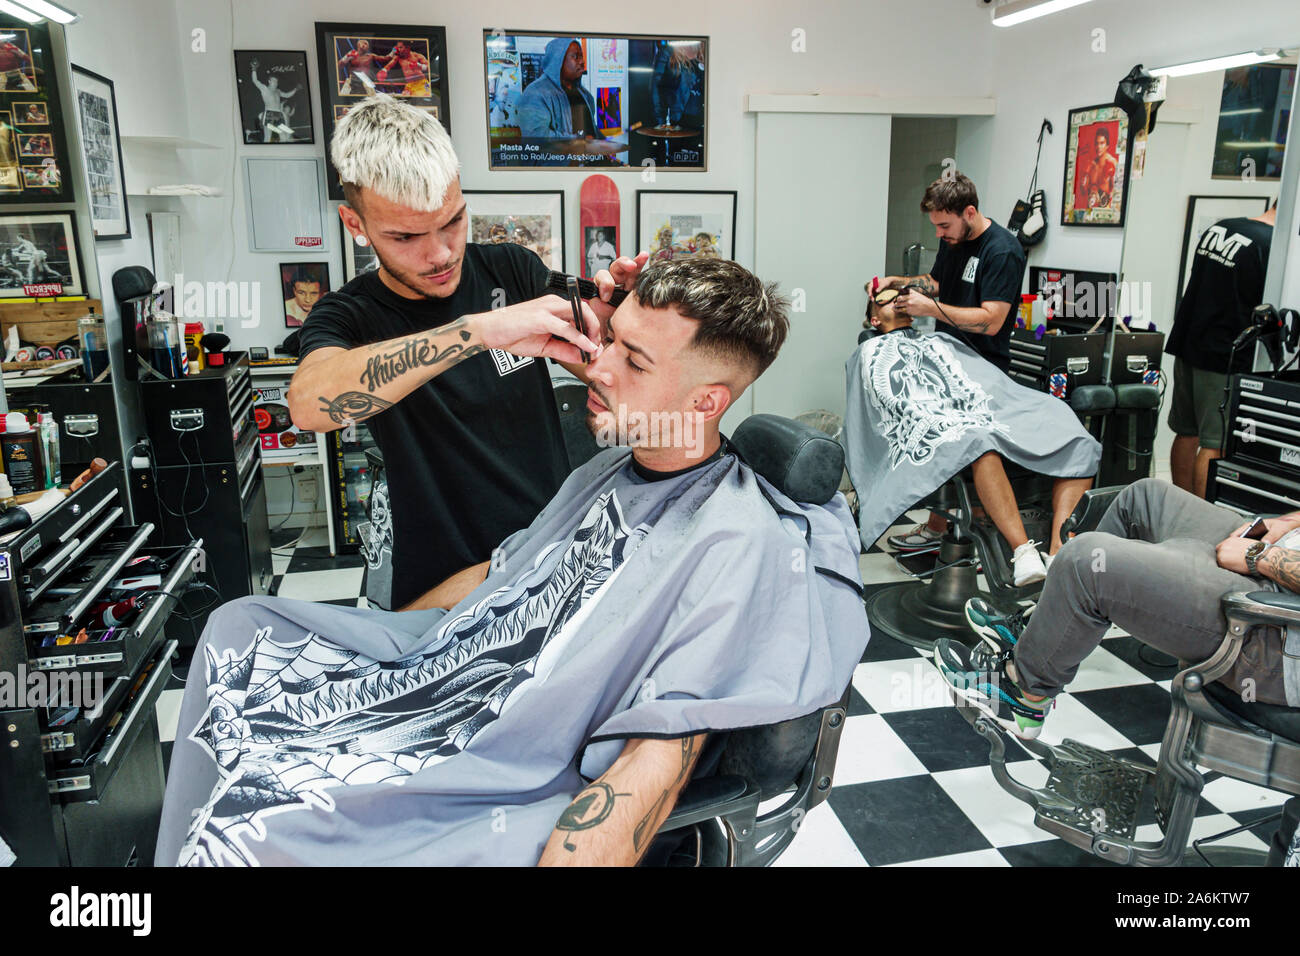 Barcelona Spain,Catalonia Ciutat Vella,Carrer dels Tallers,barbershop,barber,hairdresser,man,young adult,cutting hair,working,client,trendy haircut,bl Stock Photo